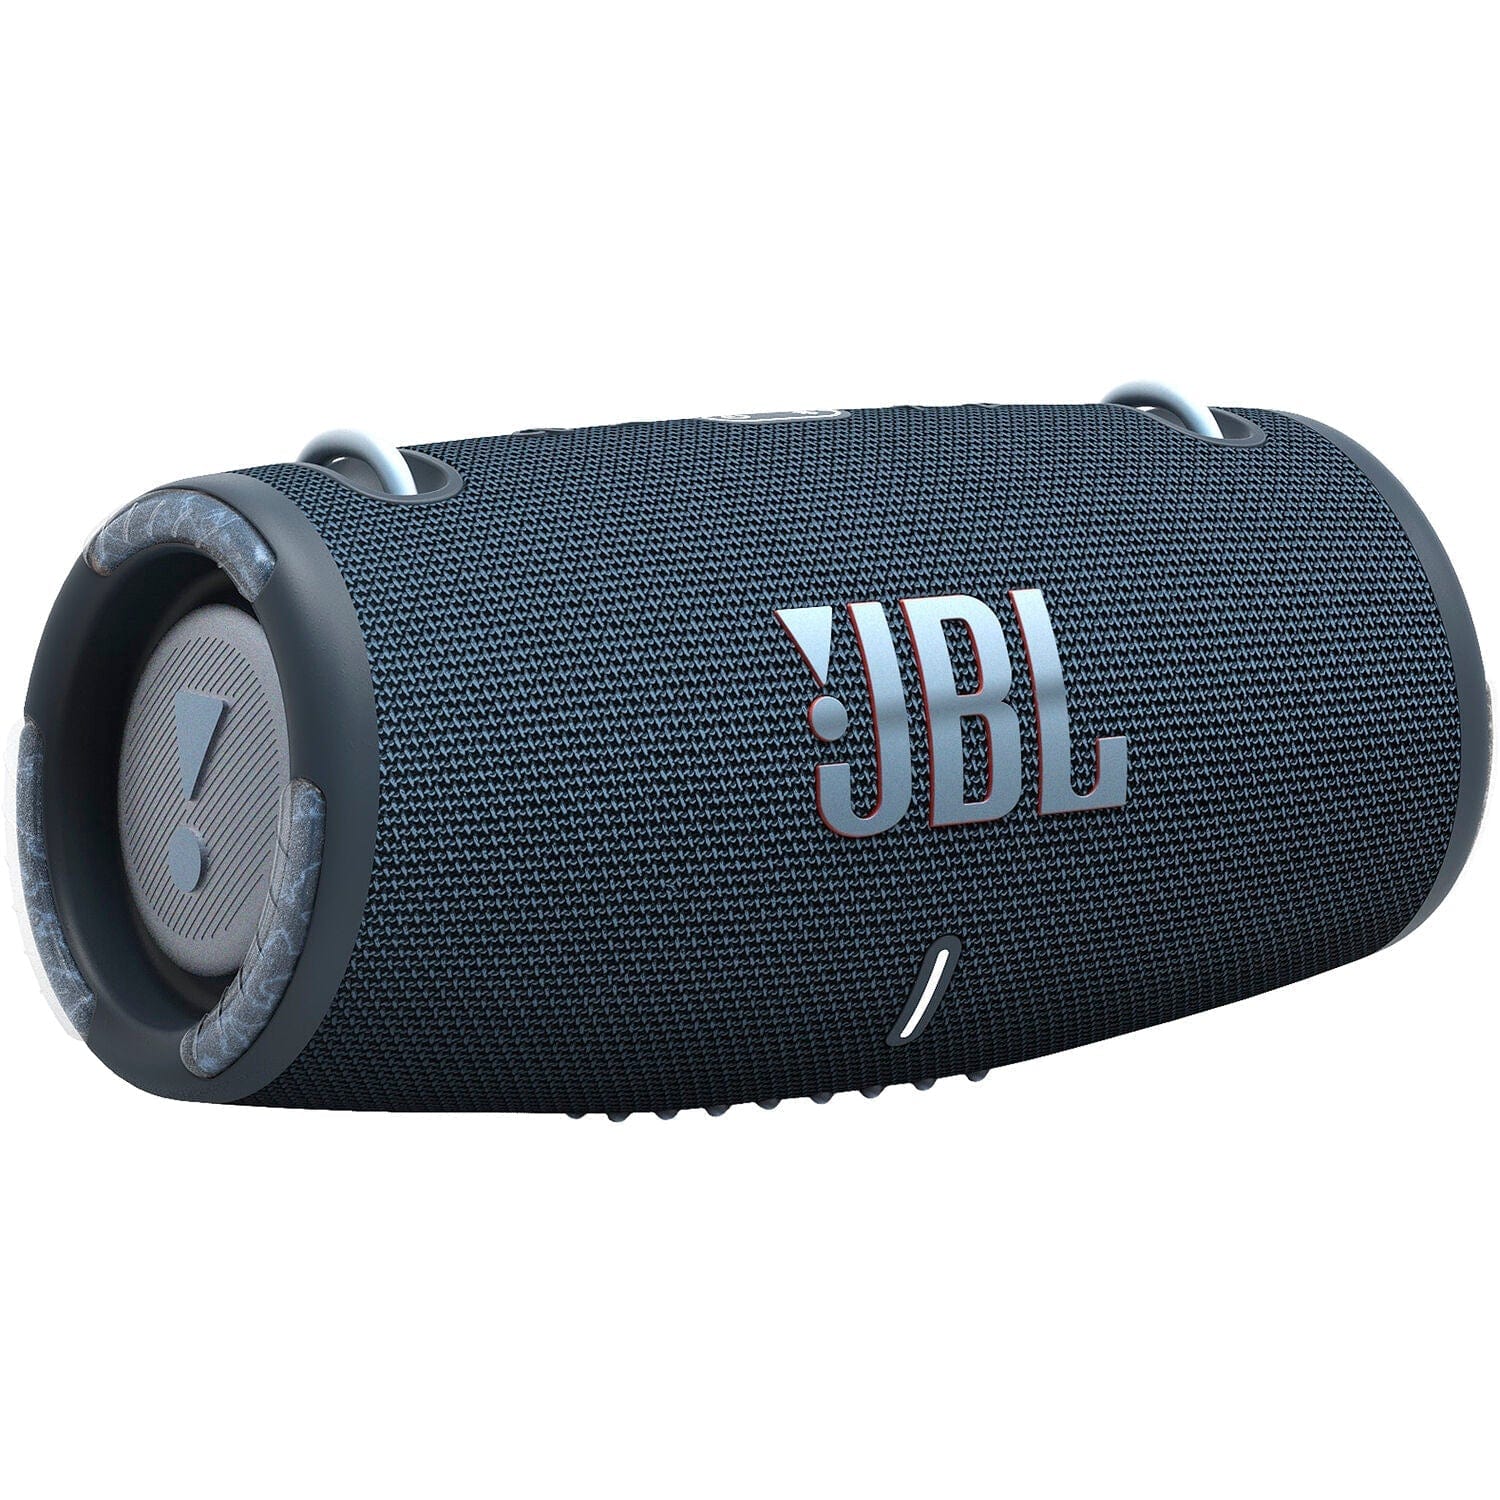  JBL Go 3: Portable Speaker with Bluetooth, Built-in Battery,  Waterproof and Dustproof Feature - Red (JBLGO3REDAM) : Electronics